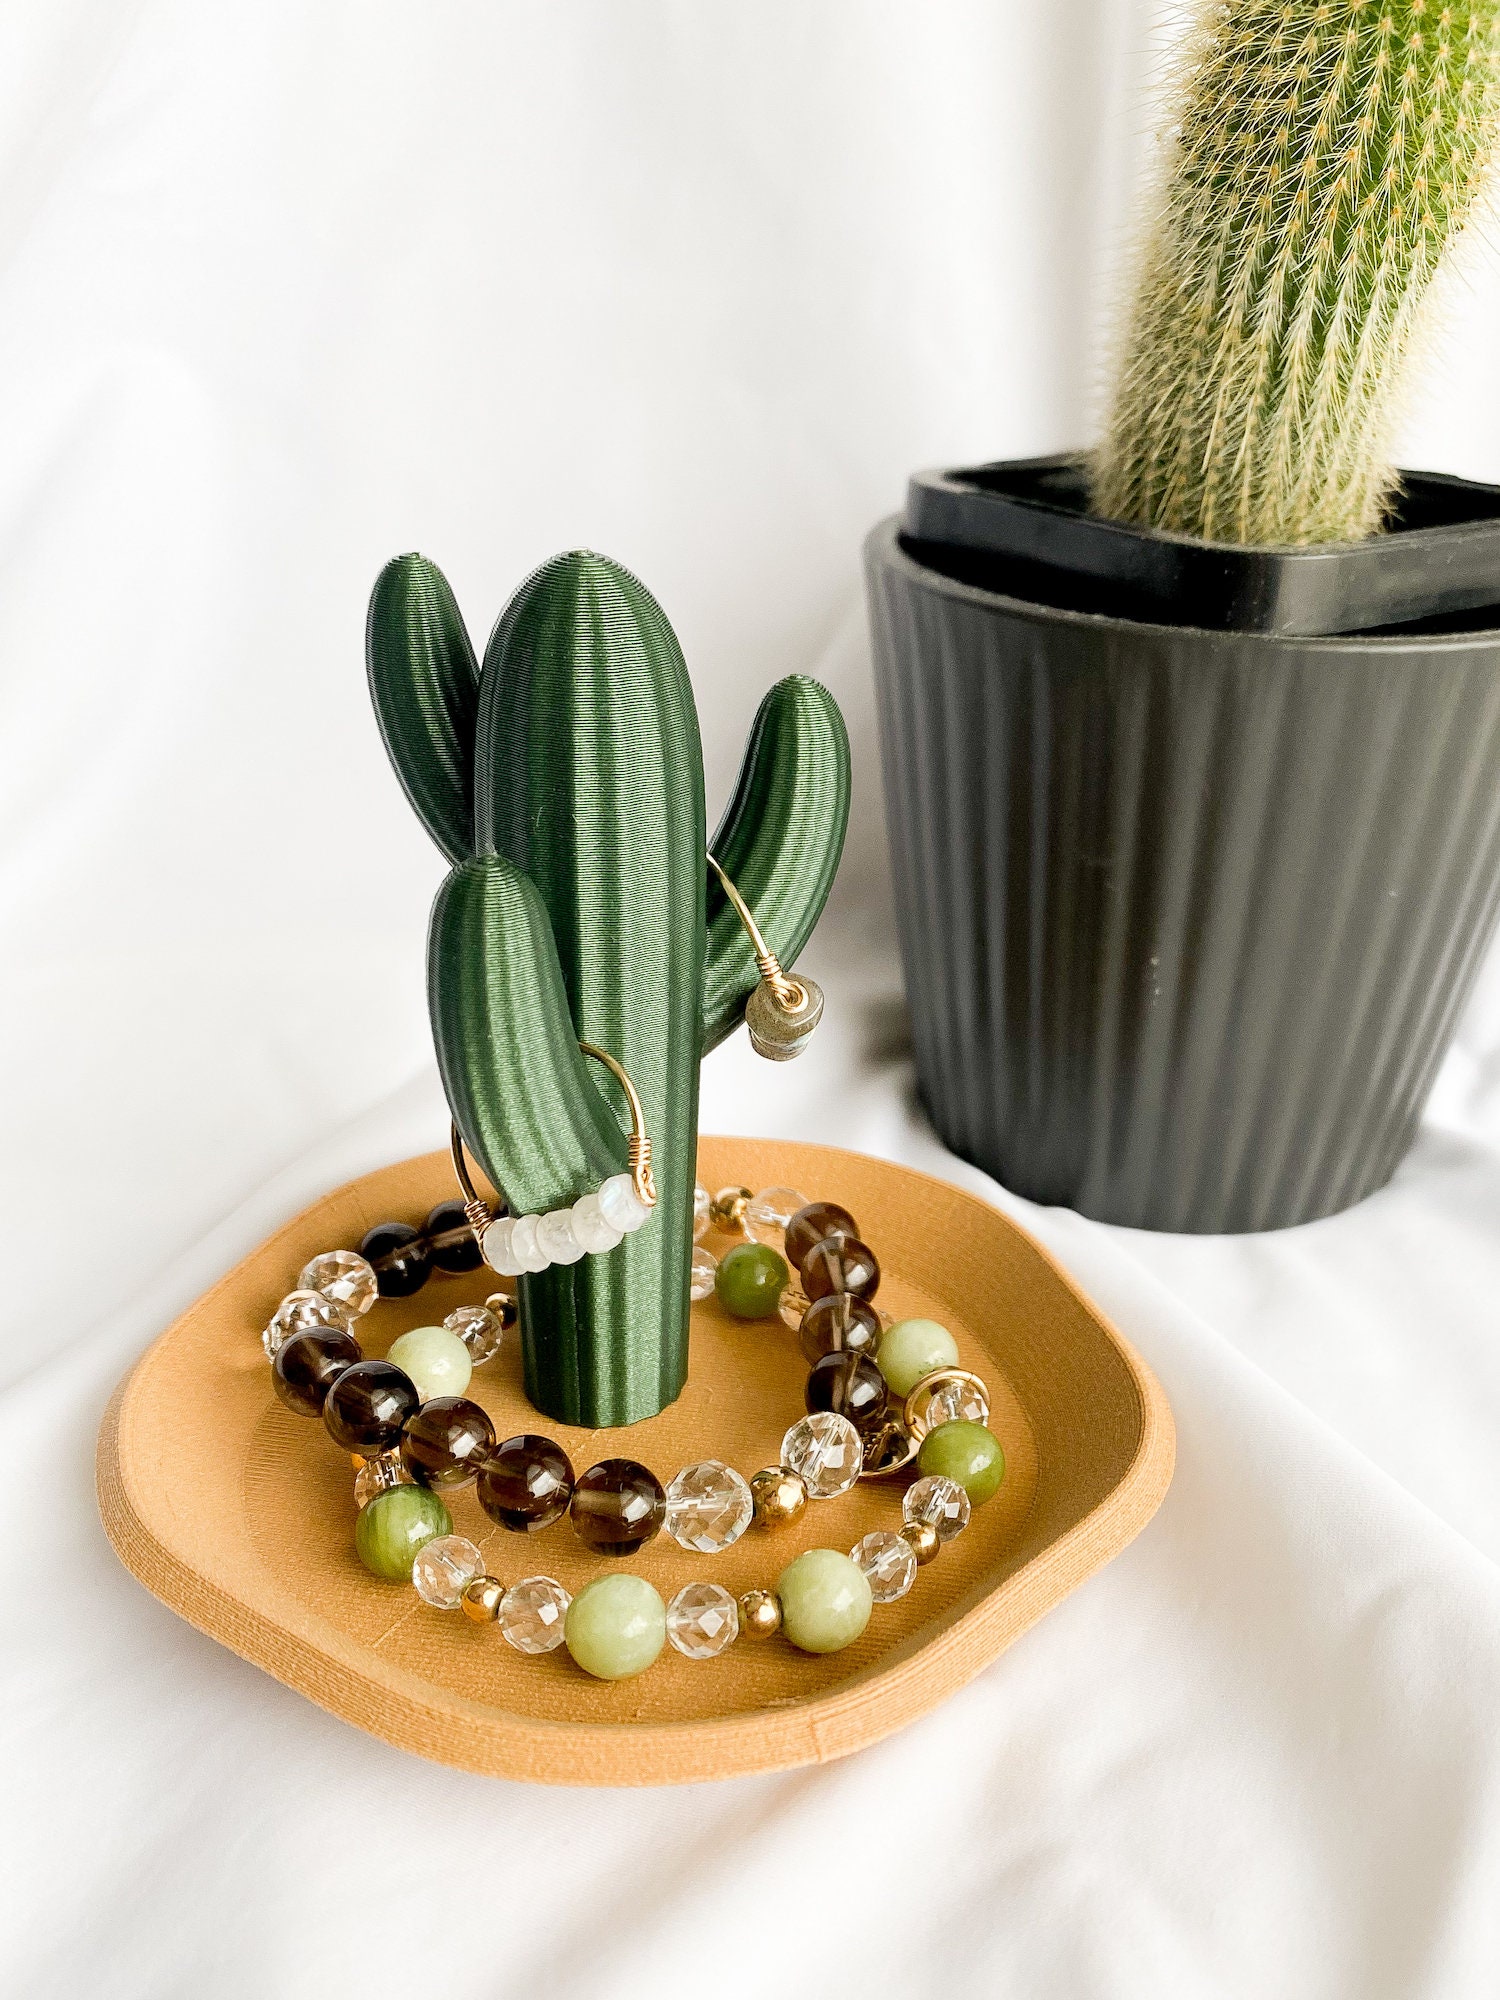 Green Cactus Ring holder with Jewelry Dish-Ceramic Succulent Jewelry  Tray-Cute Plant Ring Holder- Jewelry Organizer Display-Ring Tree